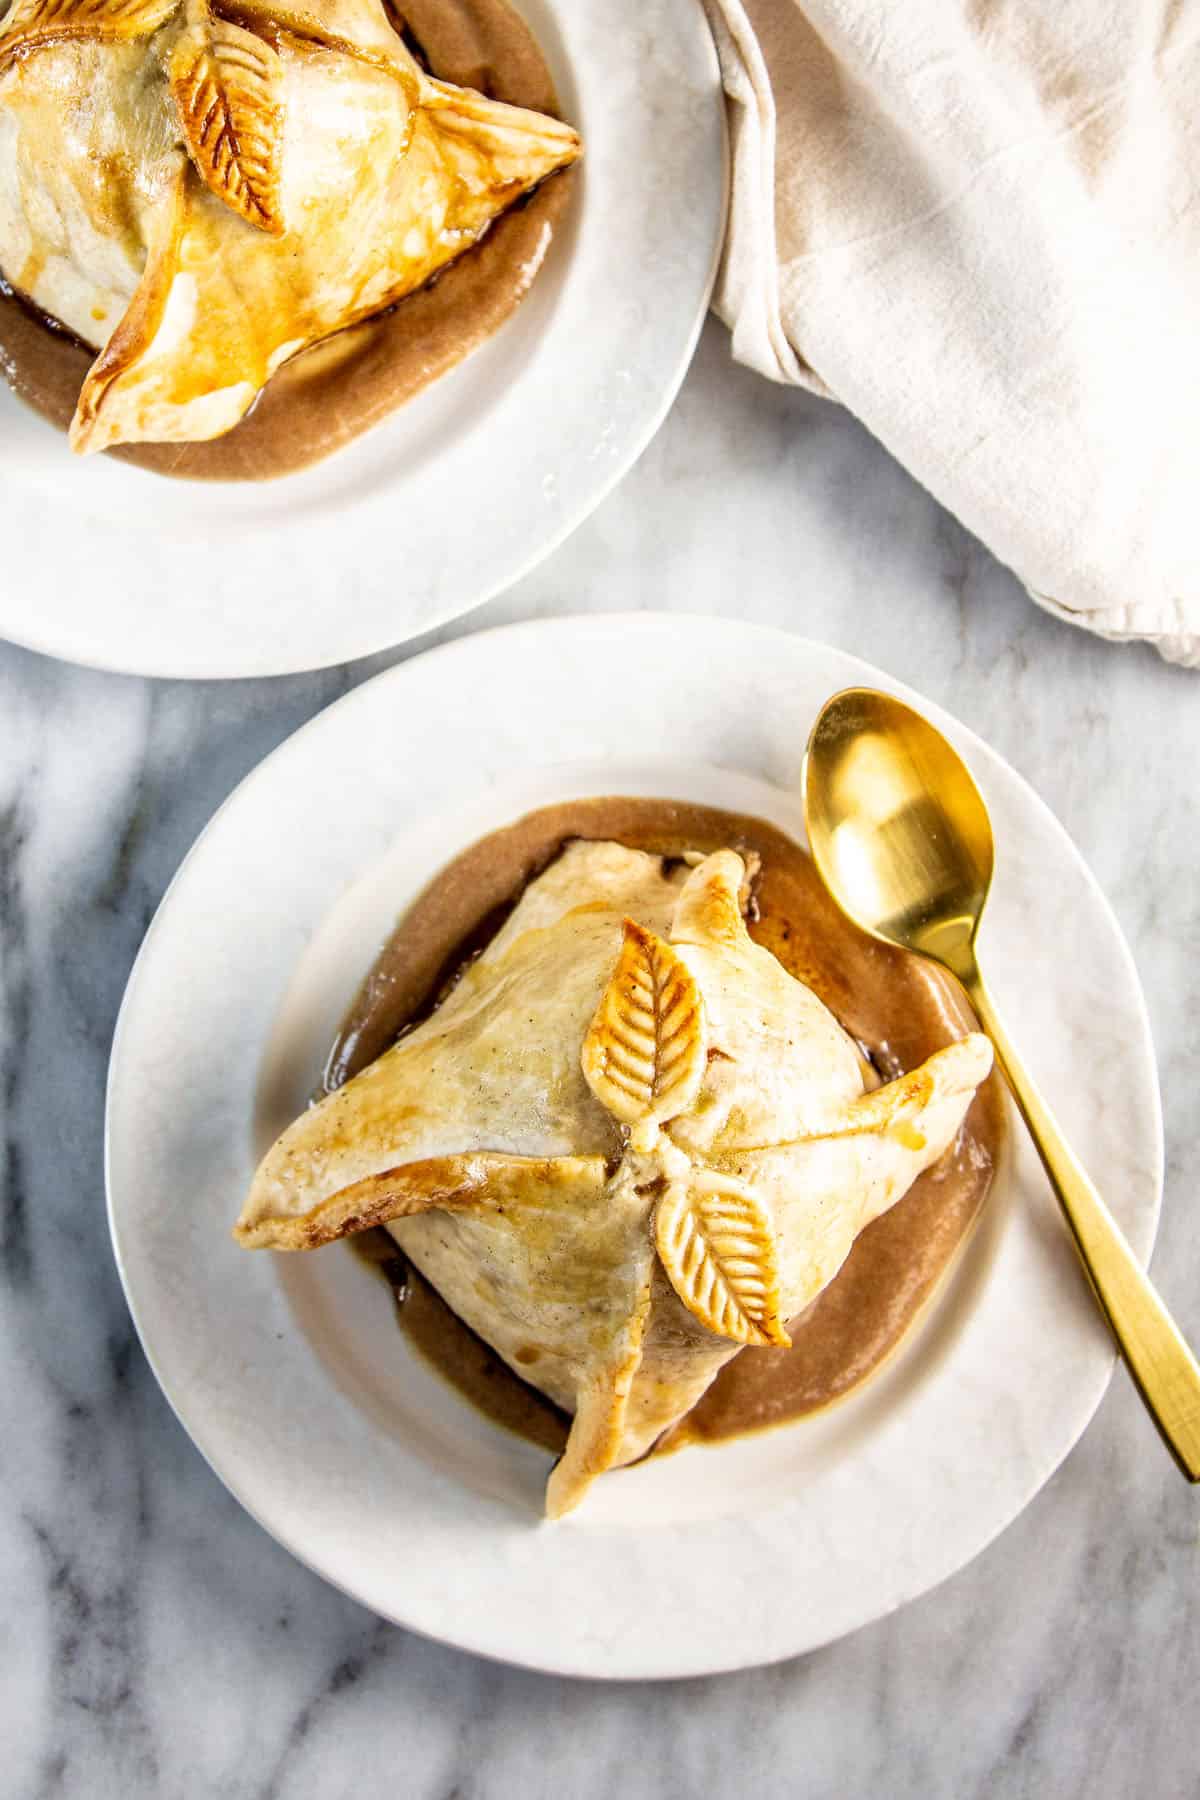 How to Make Apple Dumplings (and How to Fail)